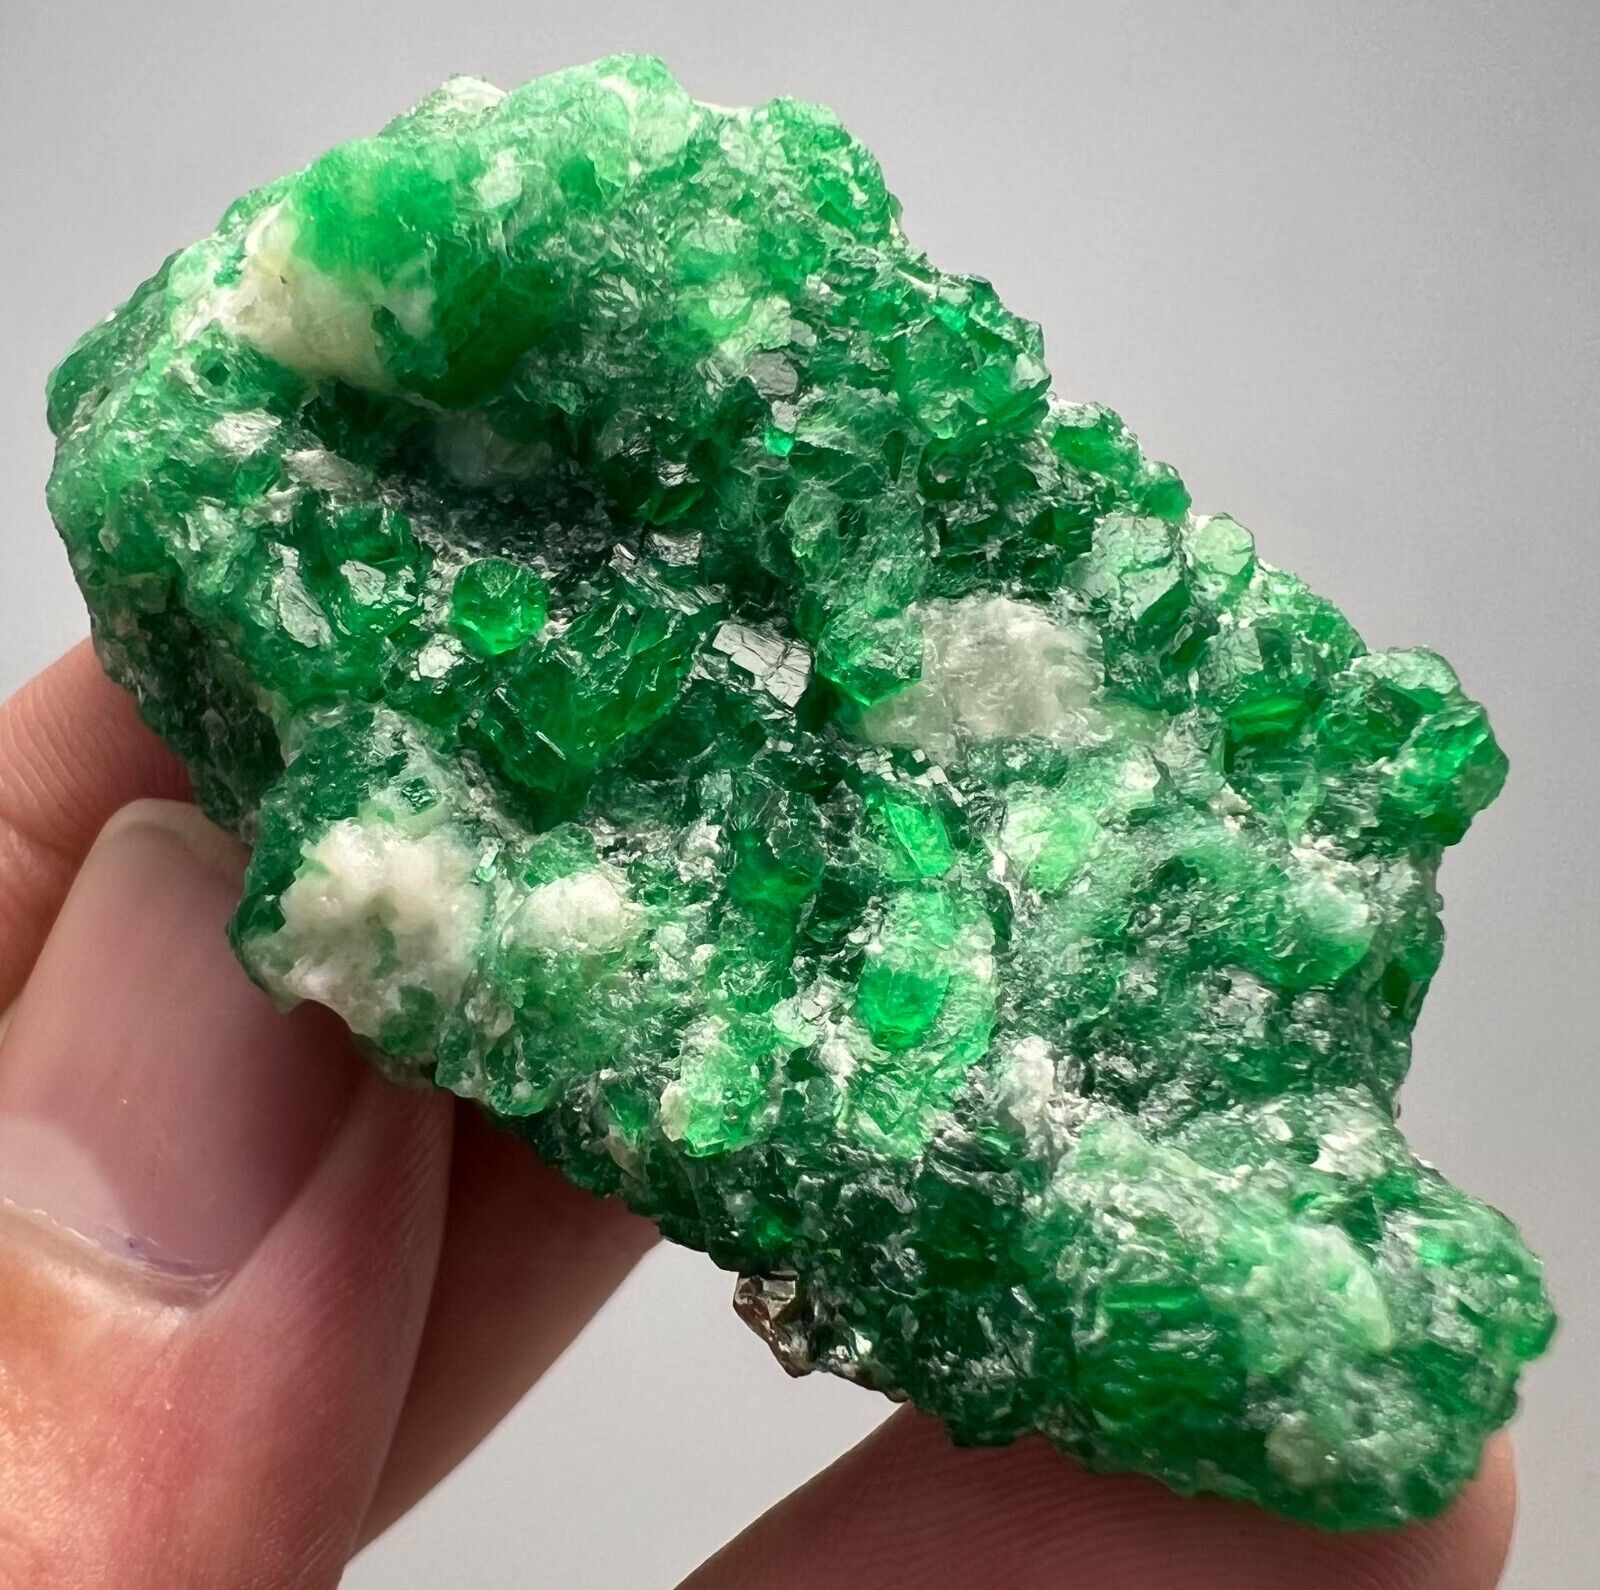 144 CT Unusual High Quality Top Green Emerald Crystals Cluster From Swat @ PAK